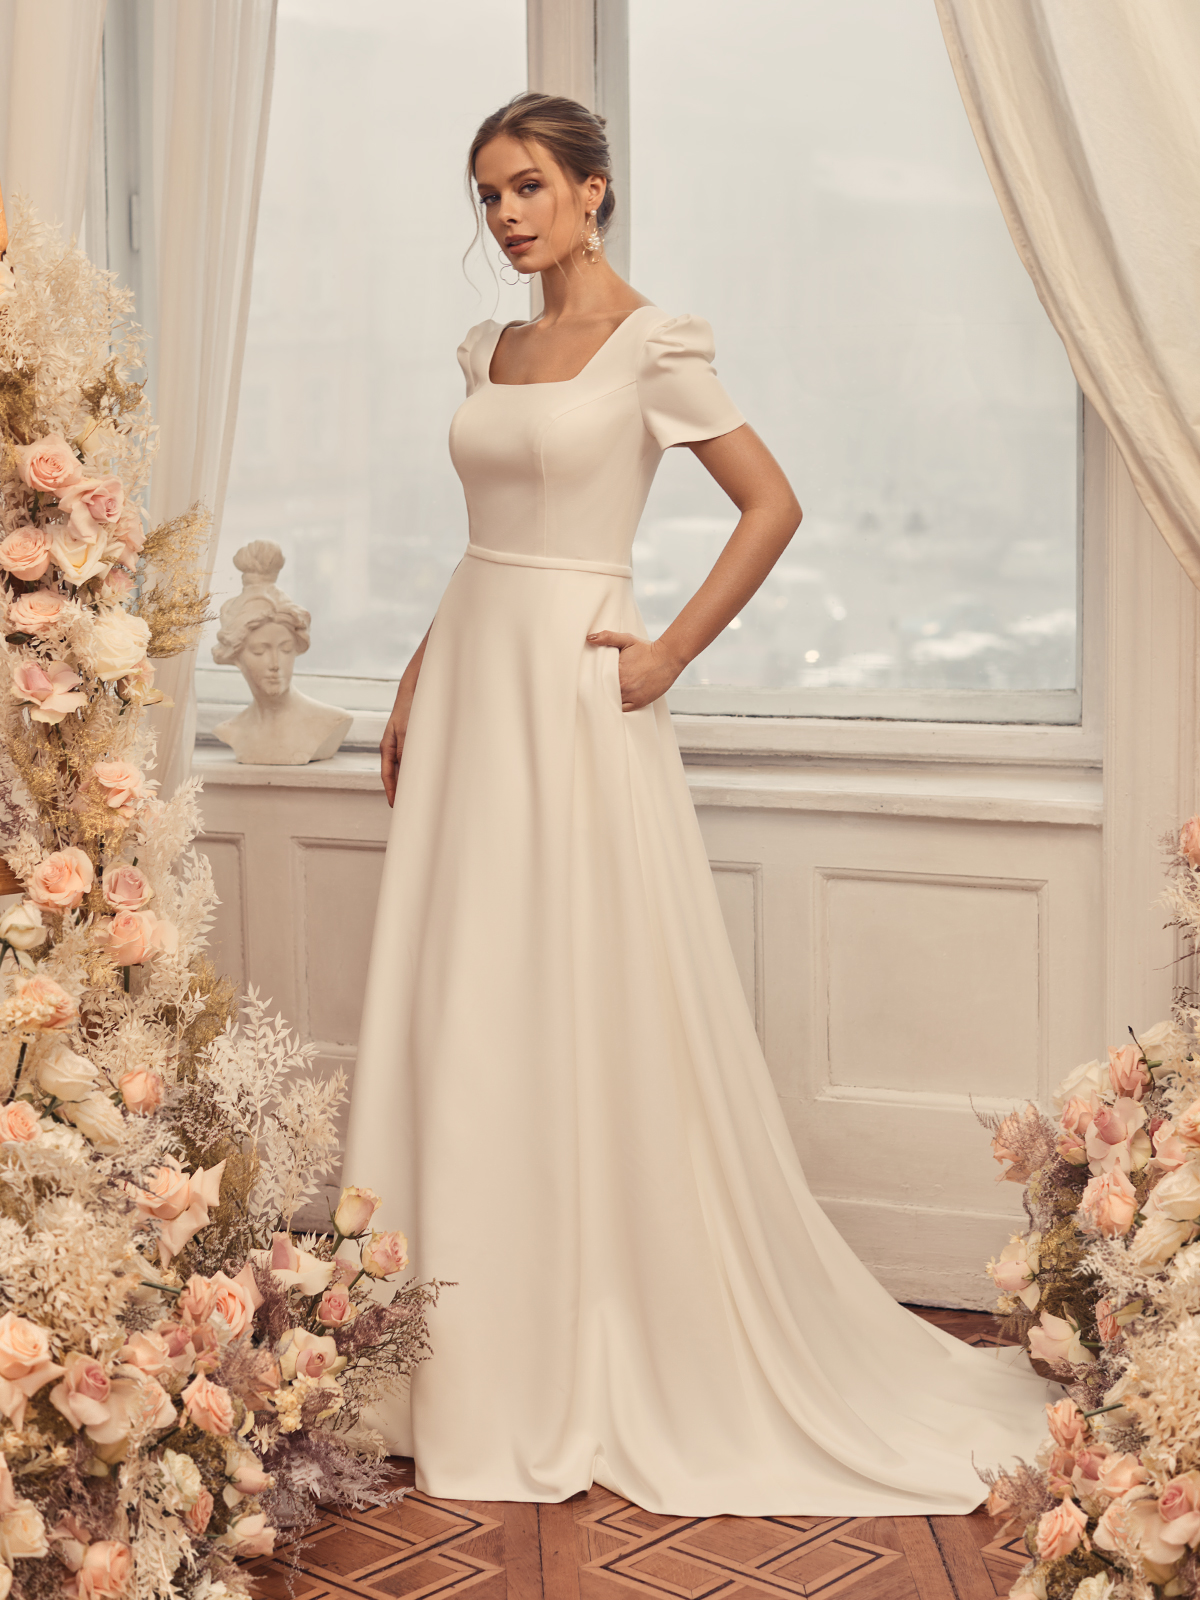 Woman standing next to flowers wearing an A-line bridal gown with a square neckline and short puff sleeves